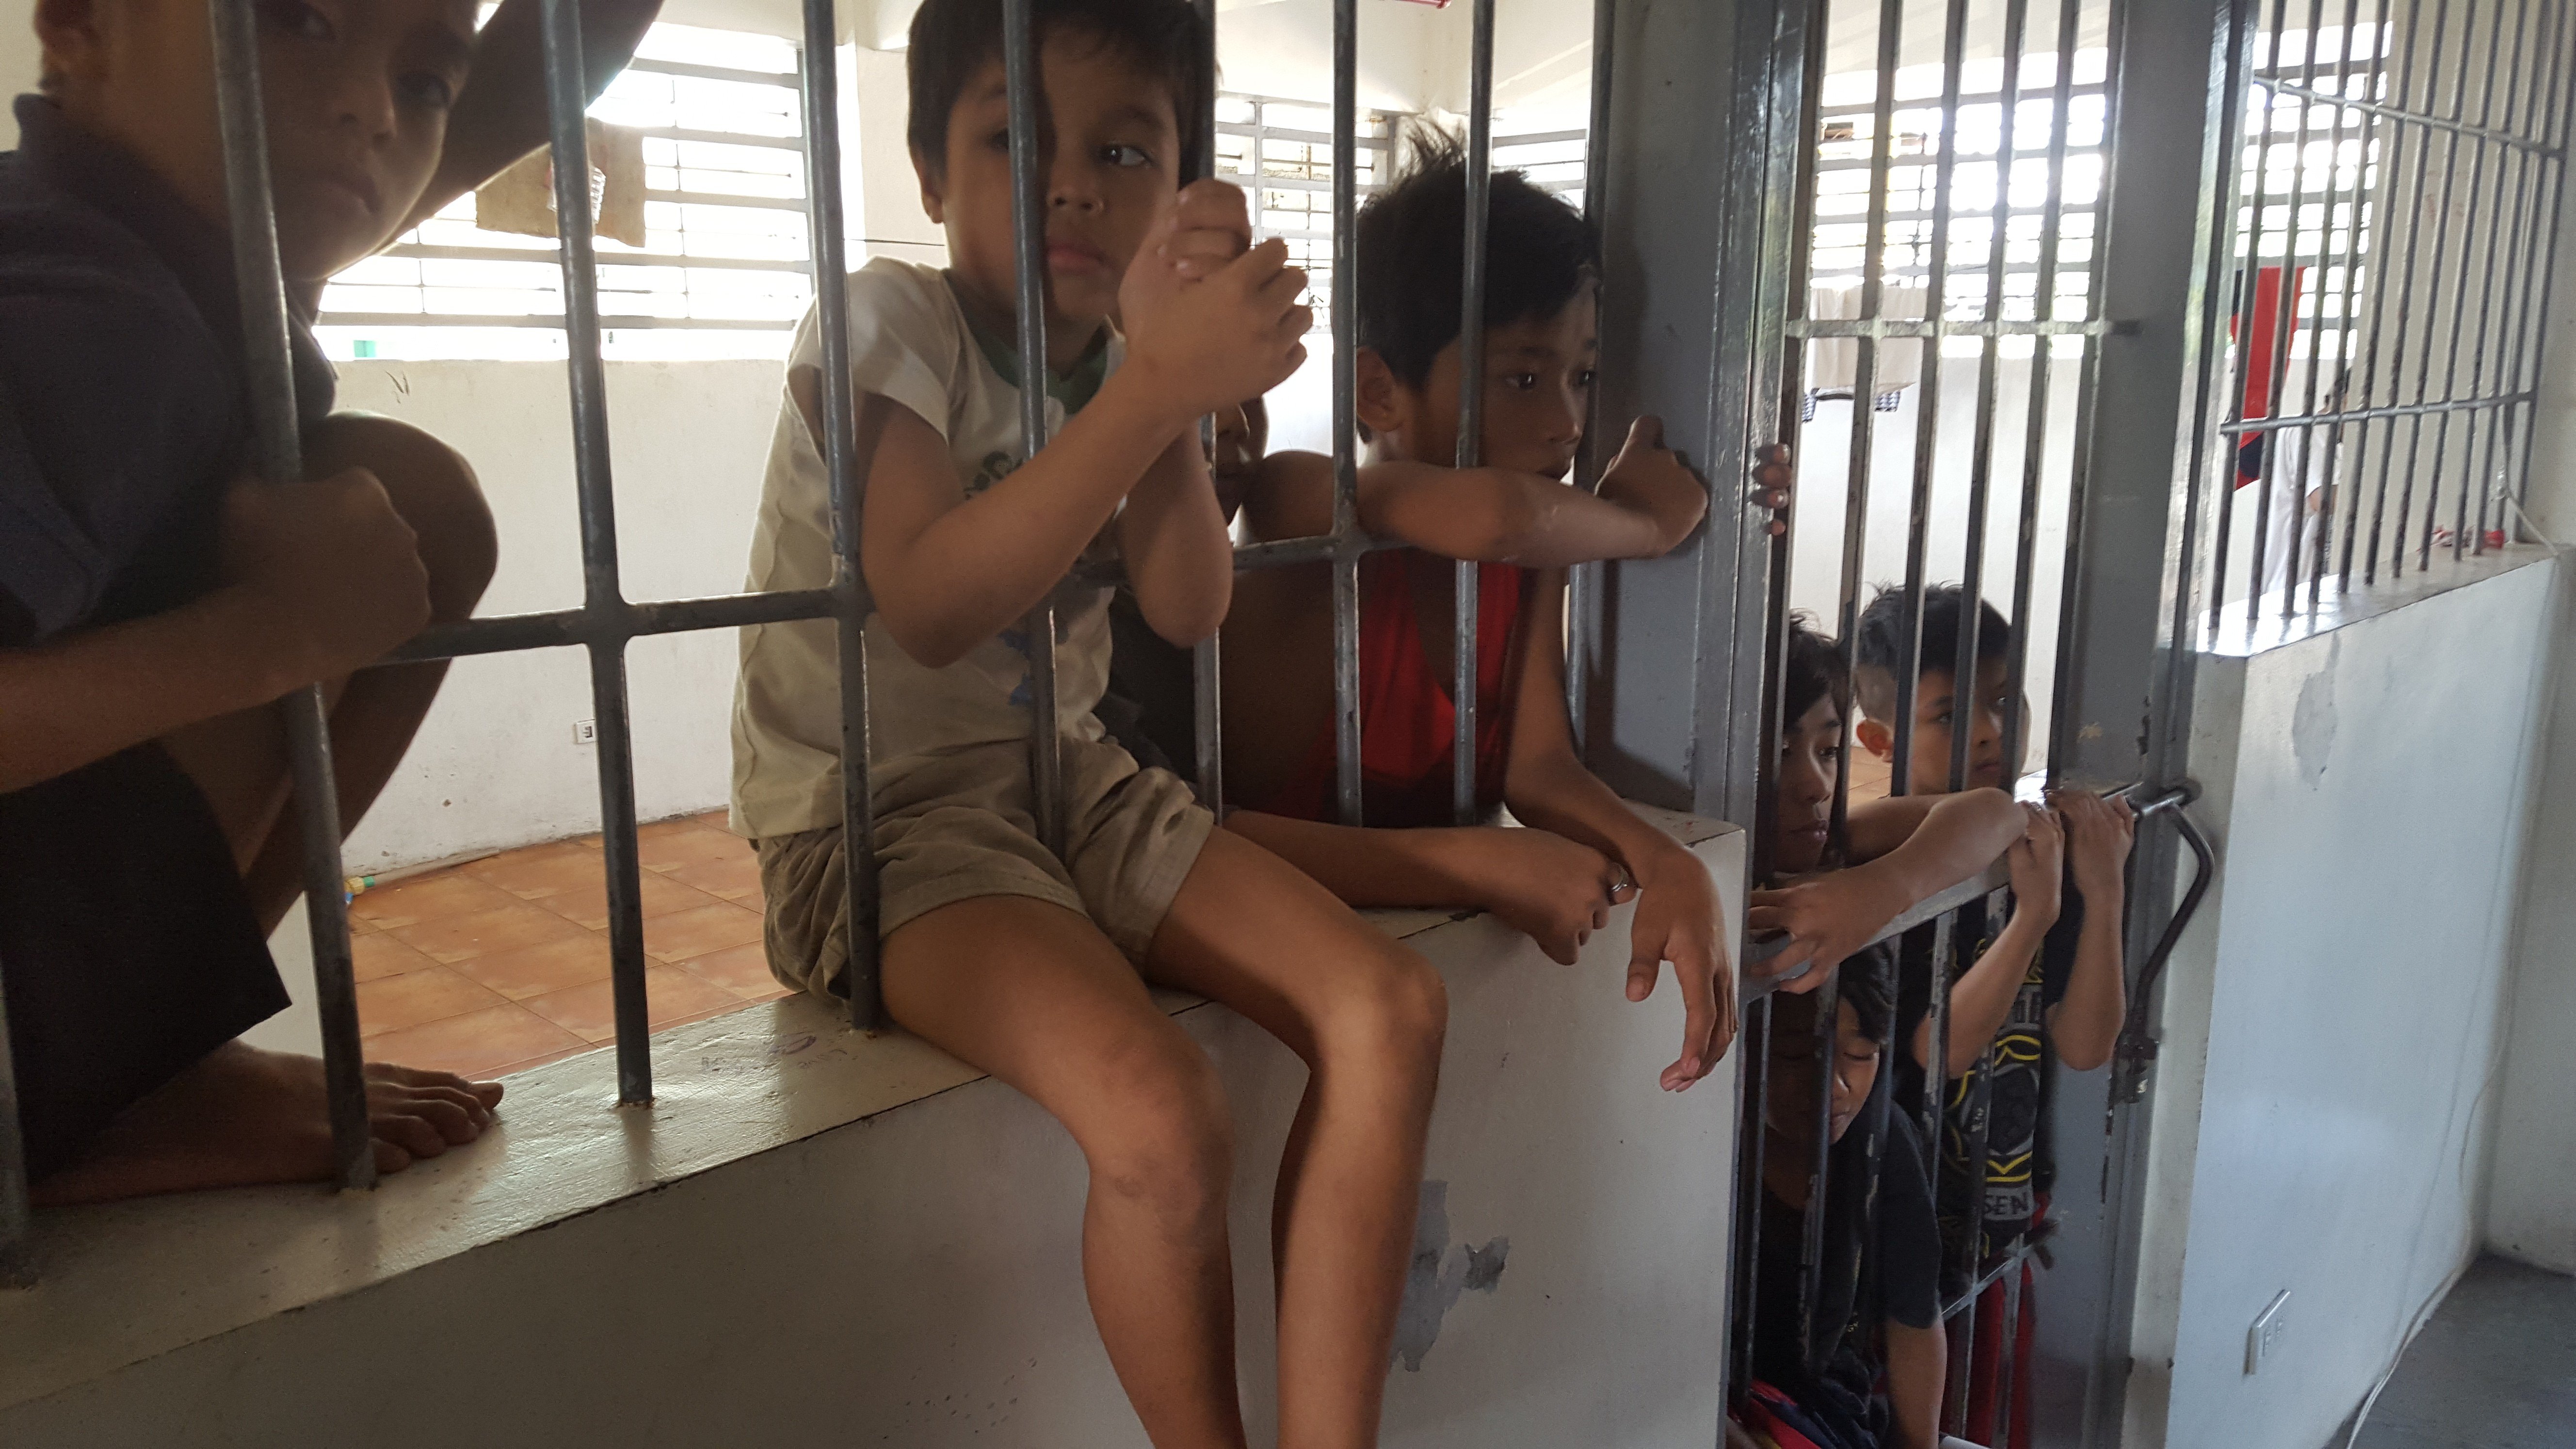 Filipino children, many of them arrested for minor crimes or for breaking arbitrary curfews, can remain confined in appalling conditions for months or even years. Photo: courtesy of Preda Foundation